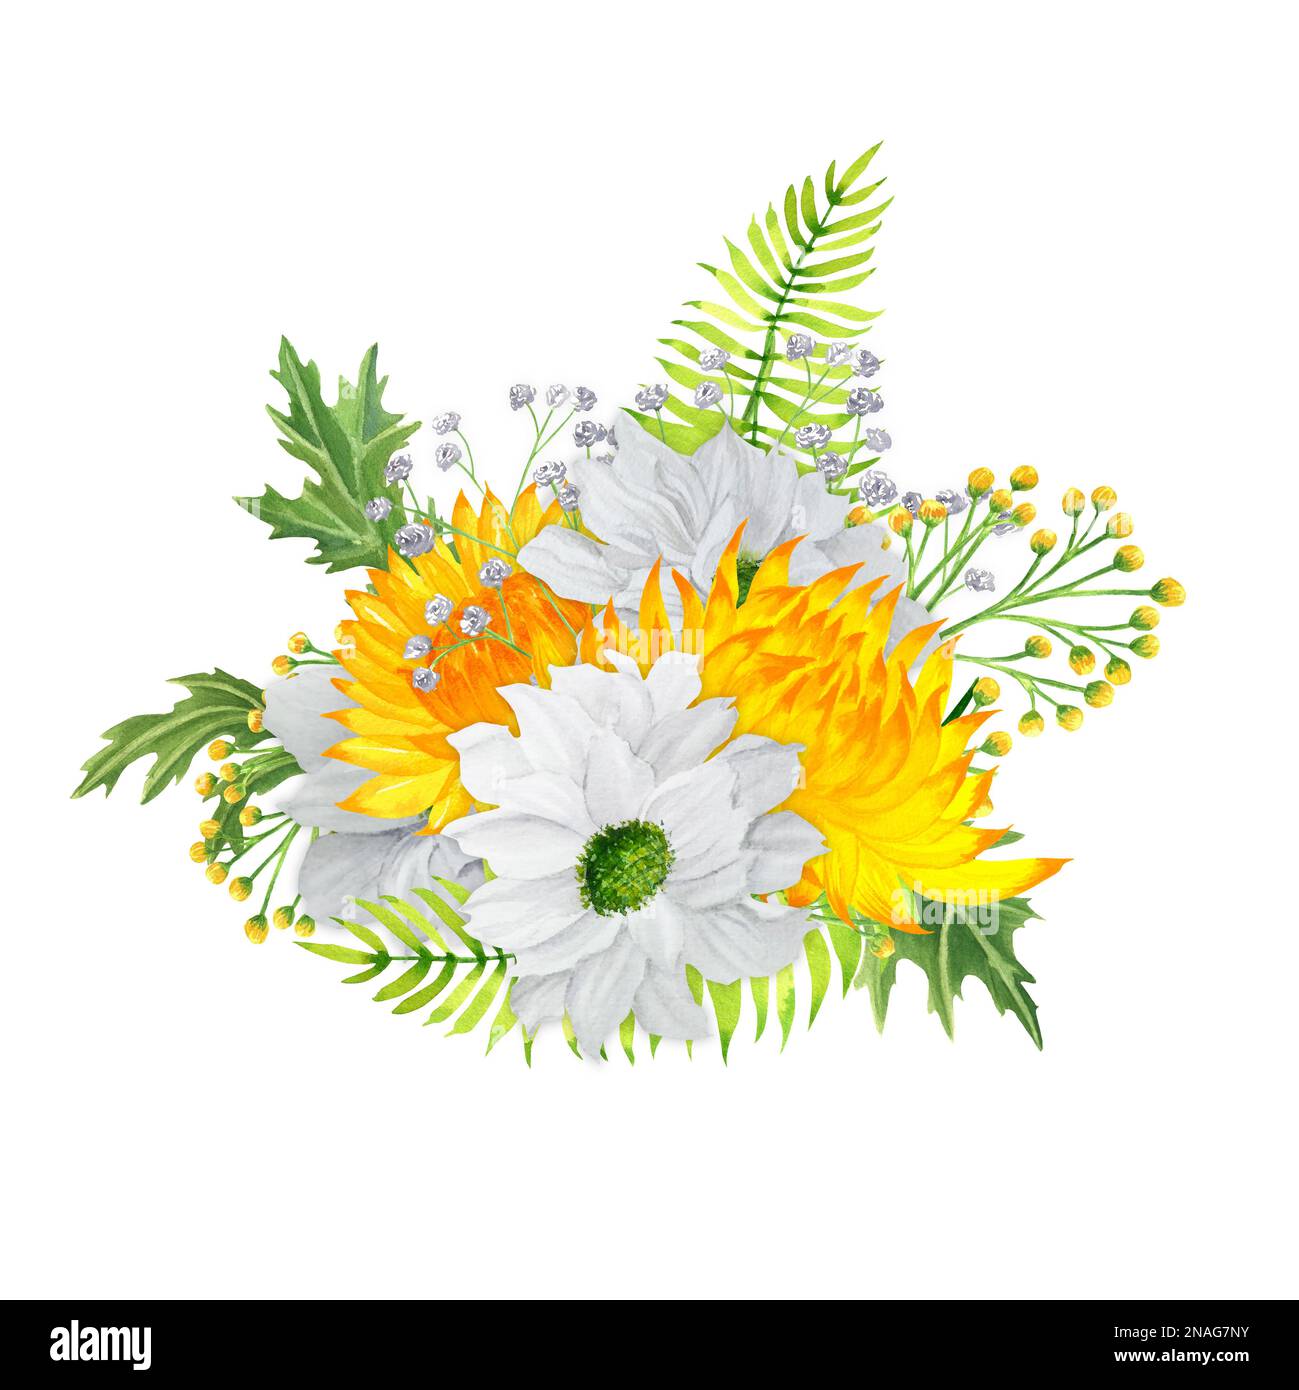 Hand-drawn watercolor composition with yellow and white chrysanthemum flowers and leaves. A small part of the Big FLOWER set Stock Photo